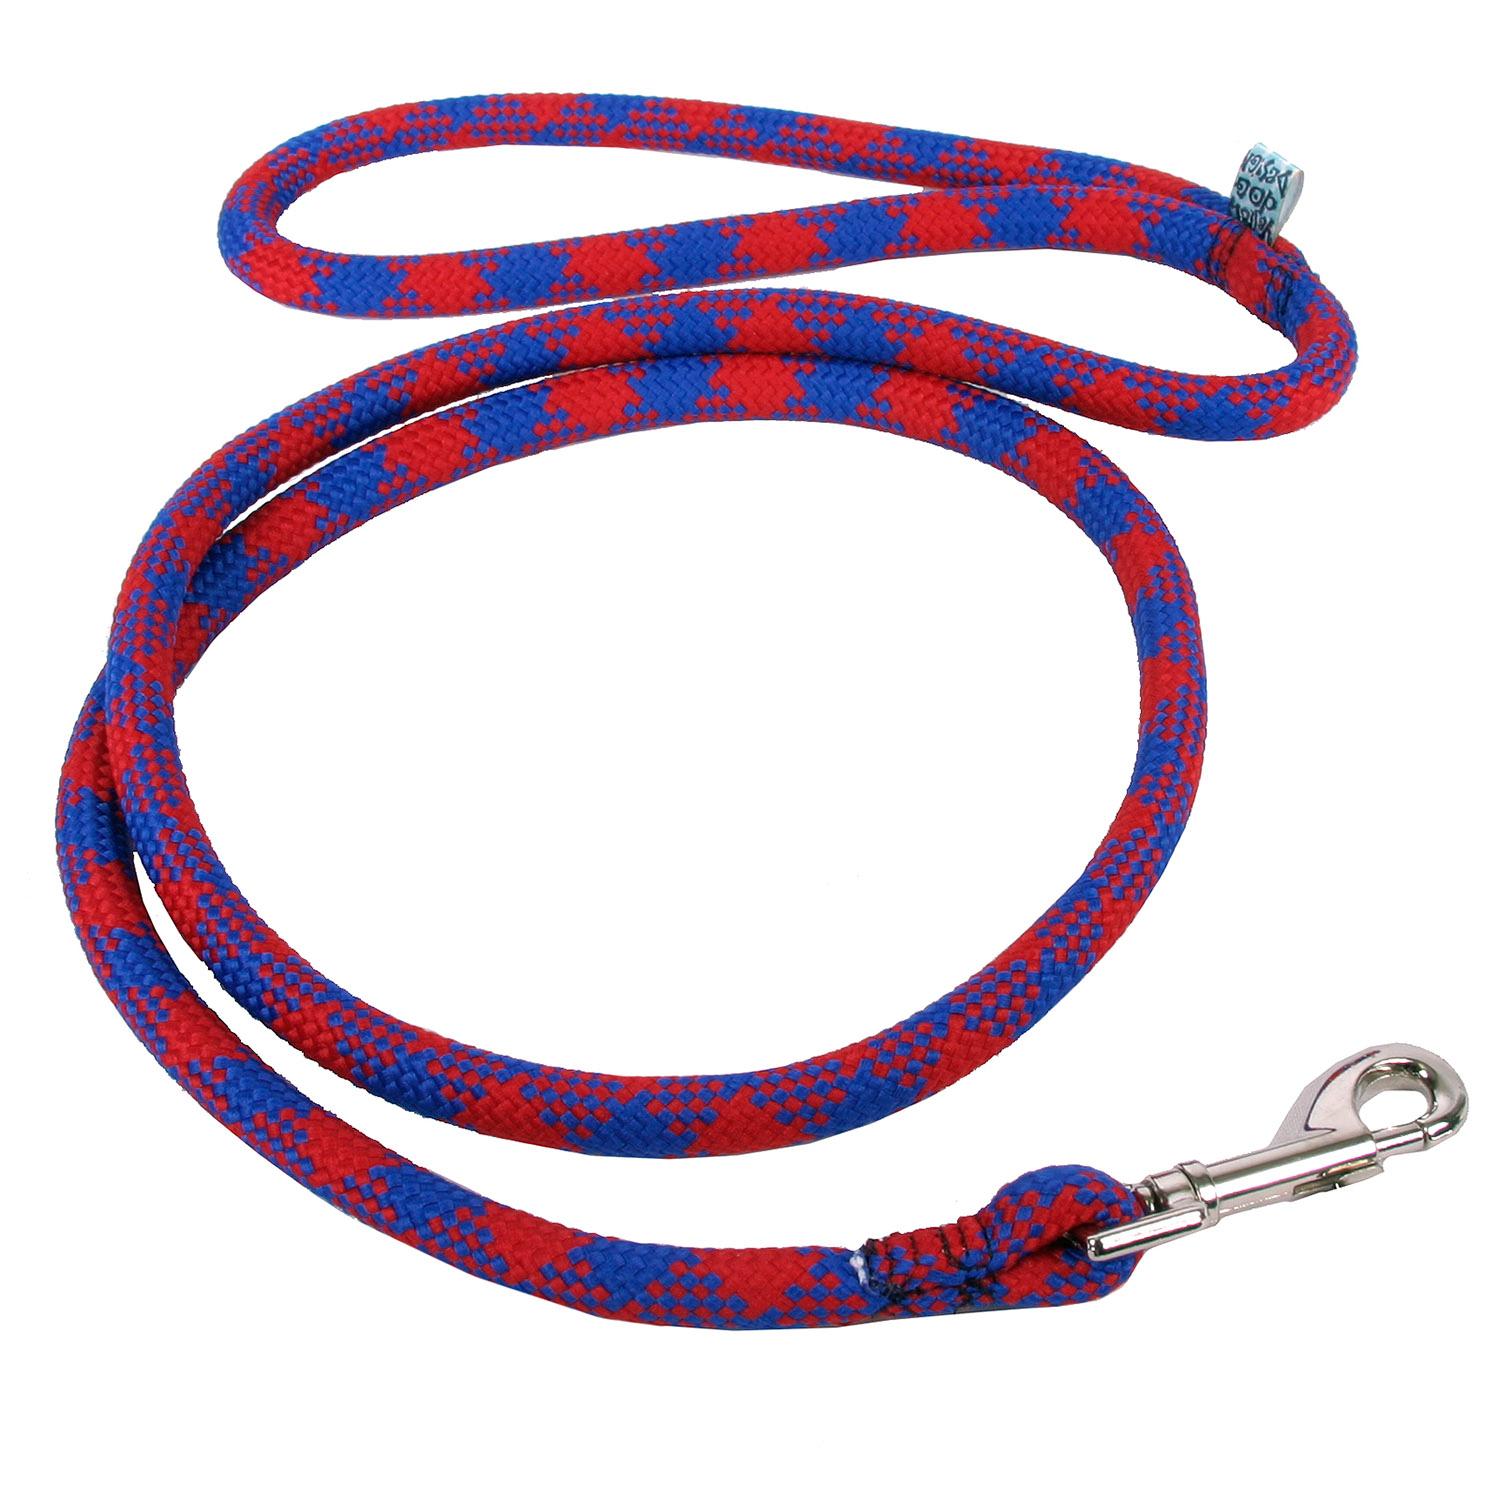 Round Braided Team Colors Dog Leash by Yellow Dog - Red and Royal Blue